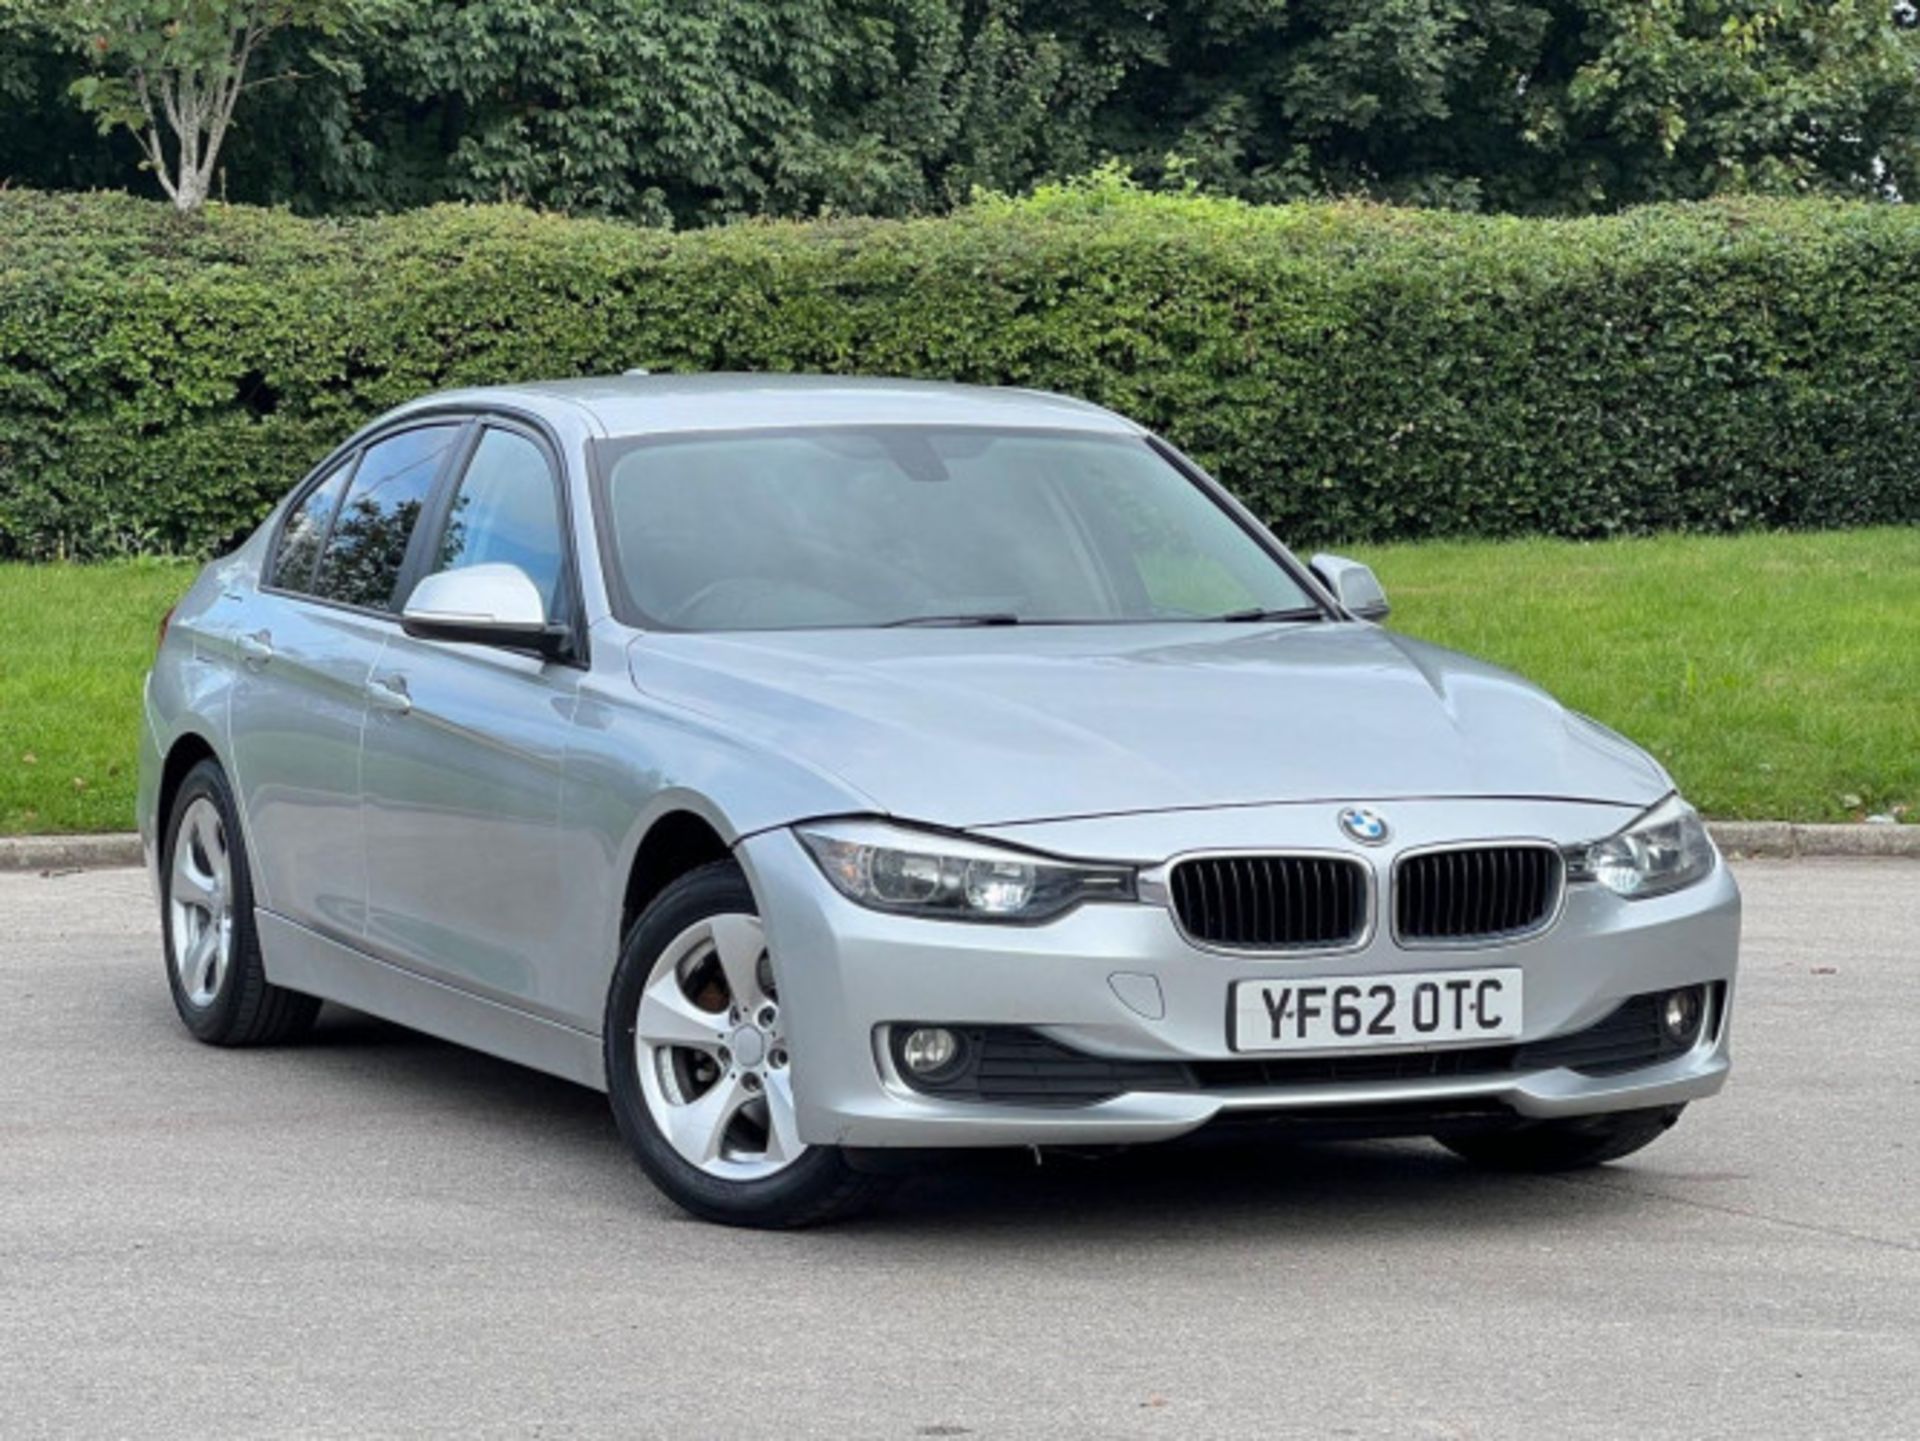 BMW 3 SERIES 2.0 DIESEL ED START STOP - A WELL-MAINTAINED GEM >>--NO VAT ON HAMMER--<< - Image 12 of 229